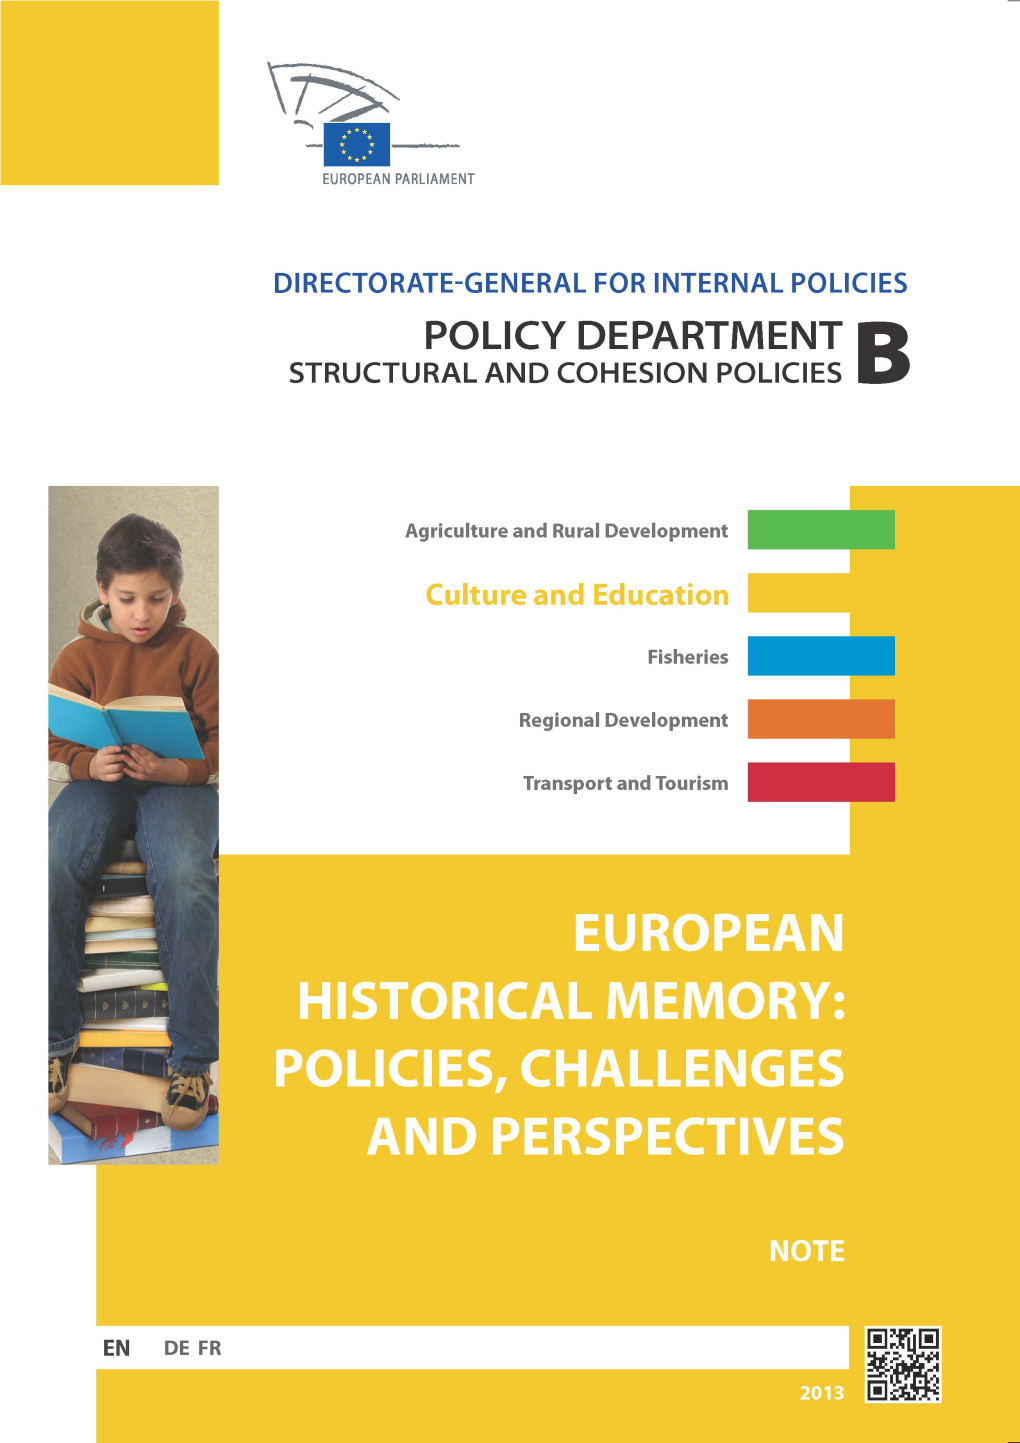 European Historical Memory: Policies, Challenges and Perspectives